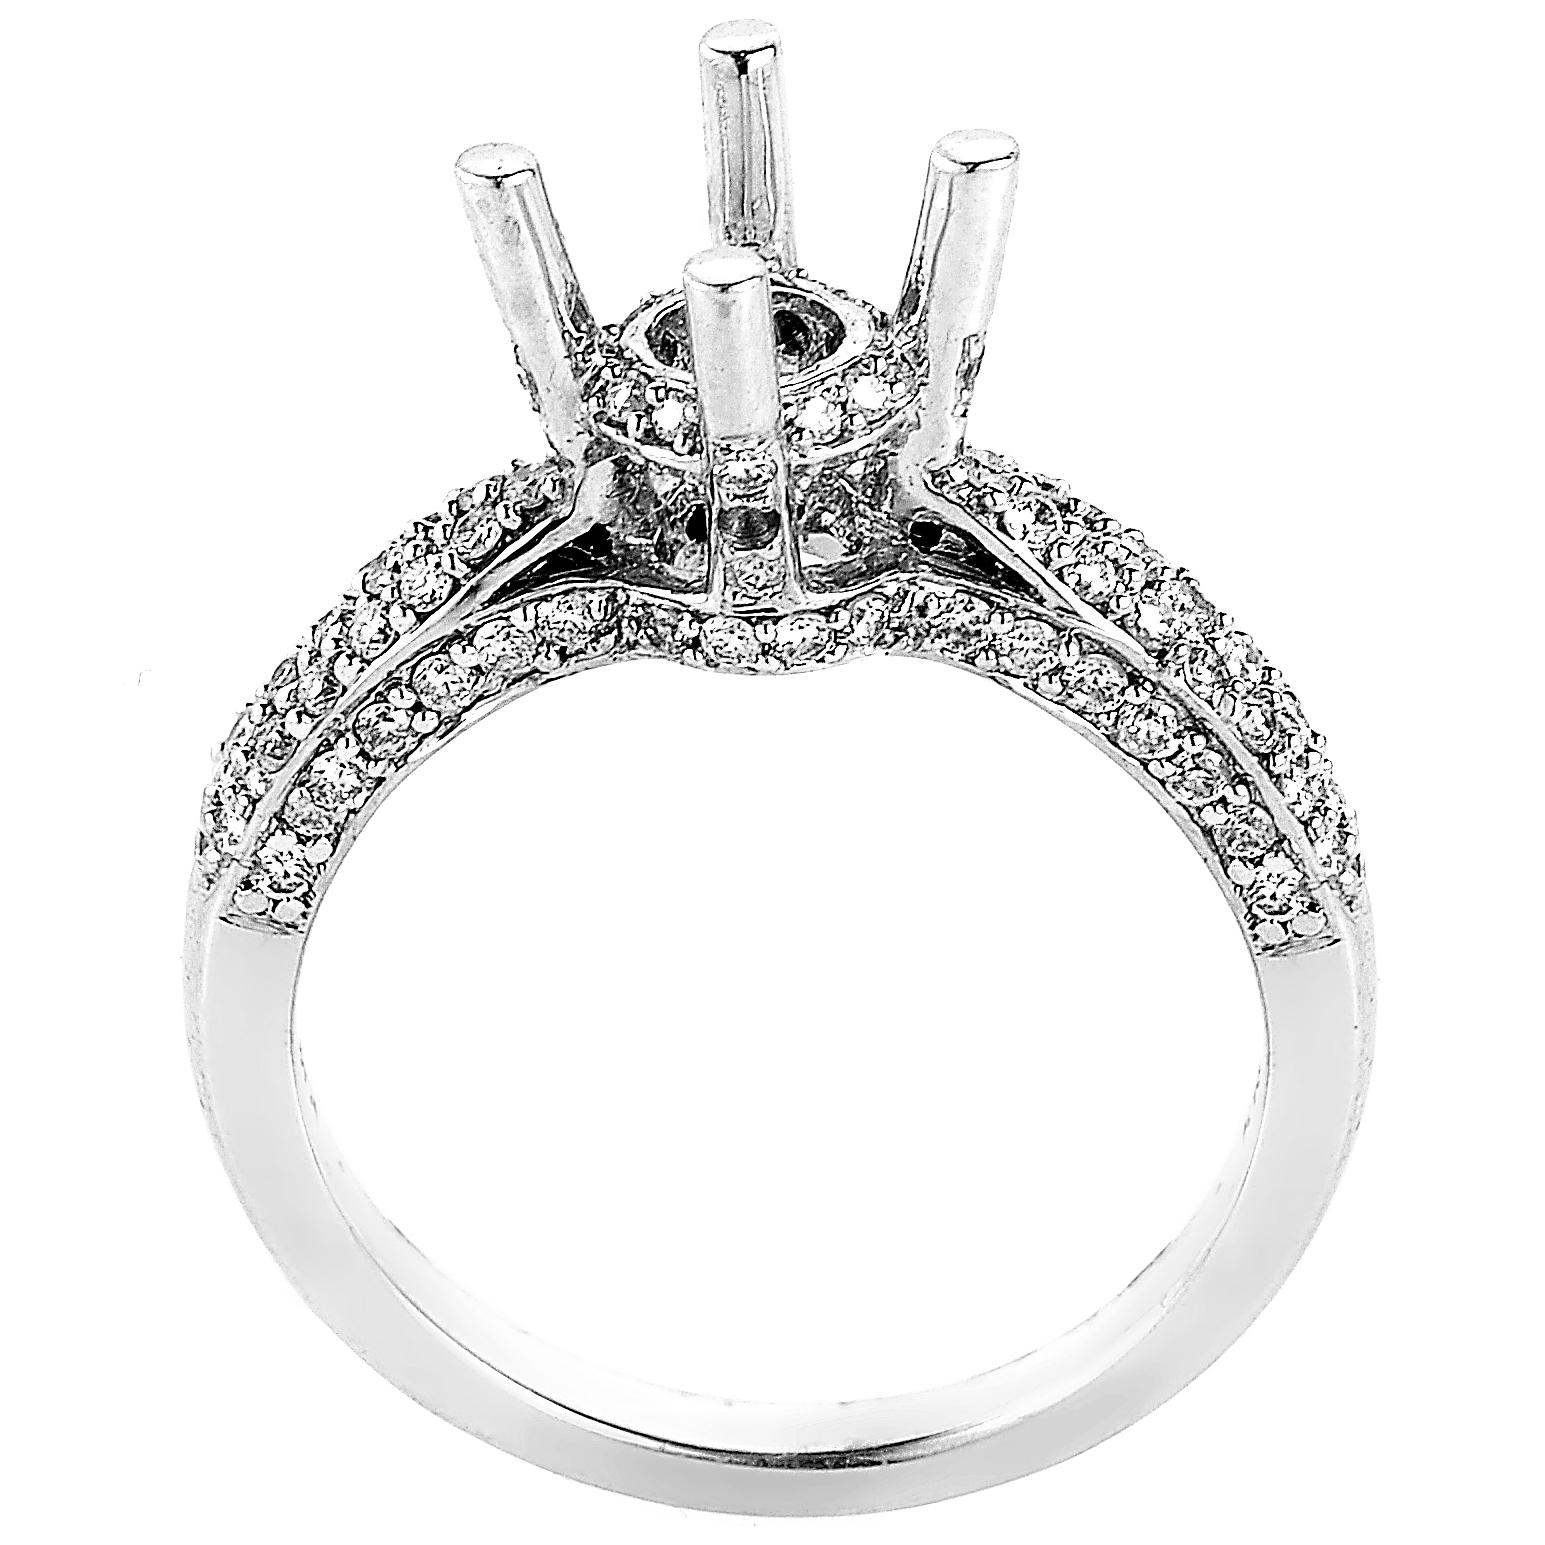 This spectacular mounting ring captivates with its refined design and dazzling diamond décor, offering an appearance of utmost style and elegance. The ring is masterfully crafted from gleaming 18K white gold that adds a nice classic feel to the